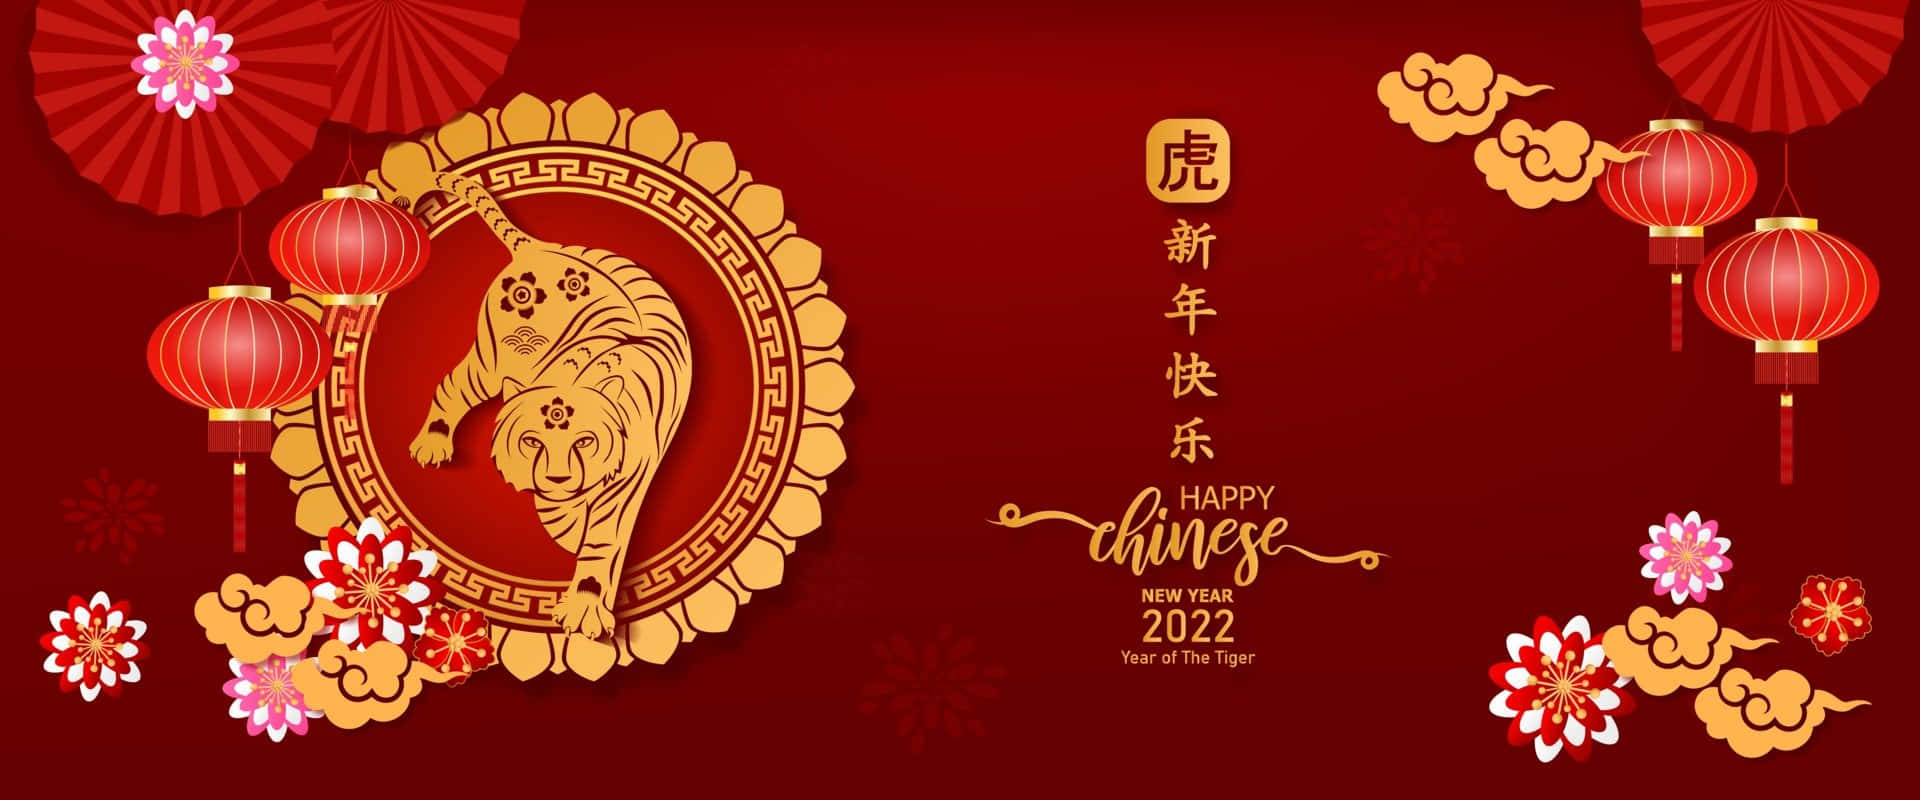 Chinese New Year 2022 Background Wallpaper